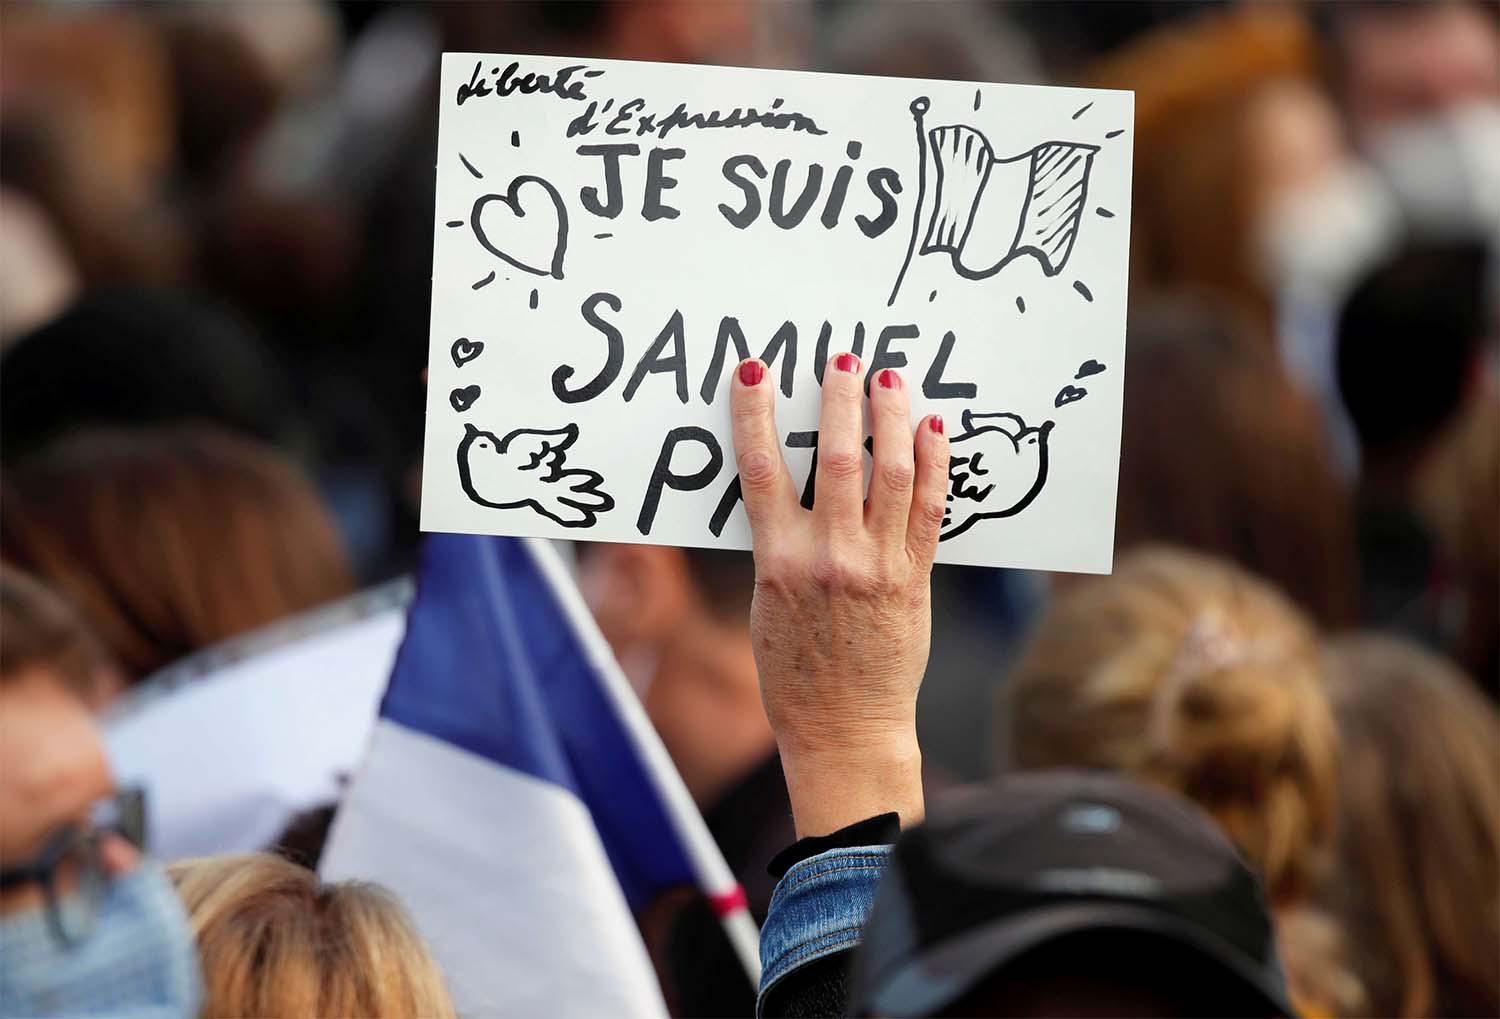 People gathered at the Place de la Republique in Paris, to pay tribute to Samuel Paty